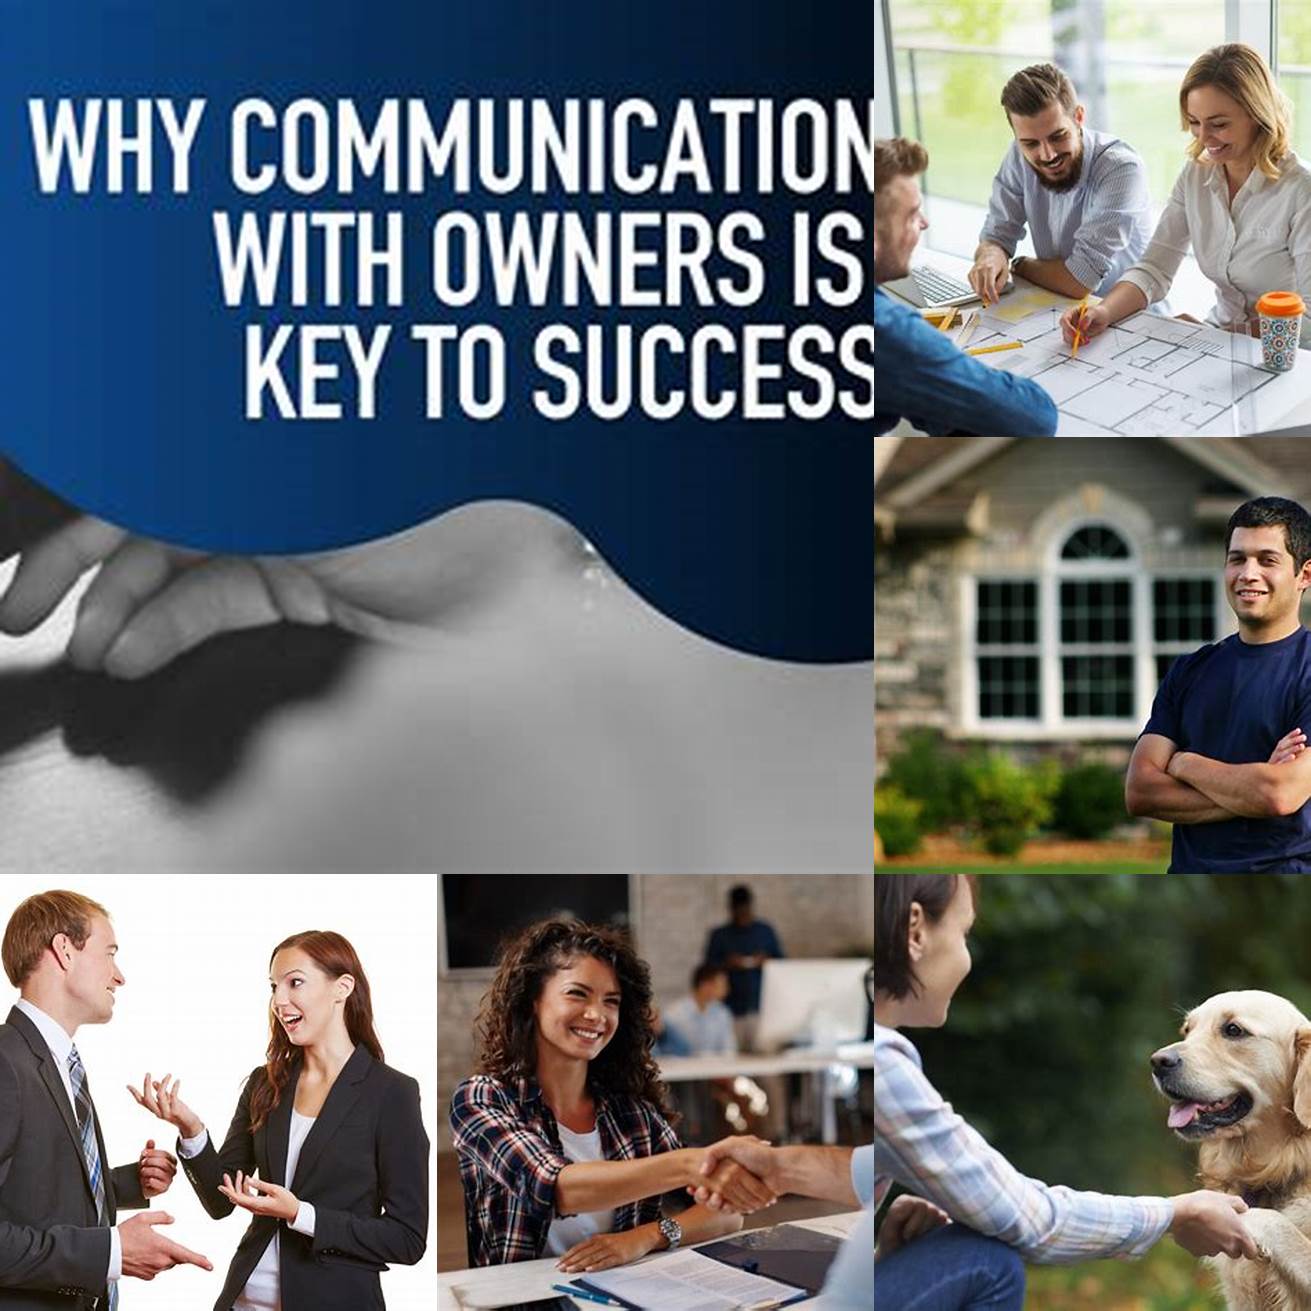 Communicate with the owner